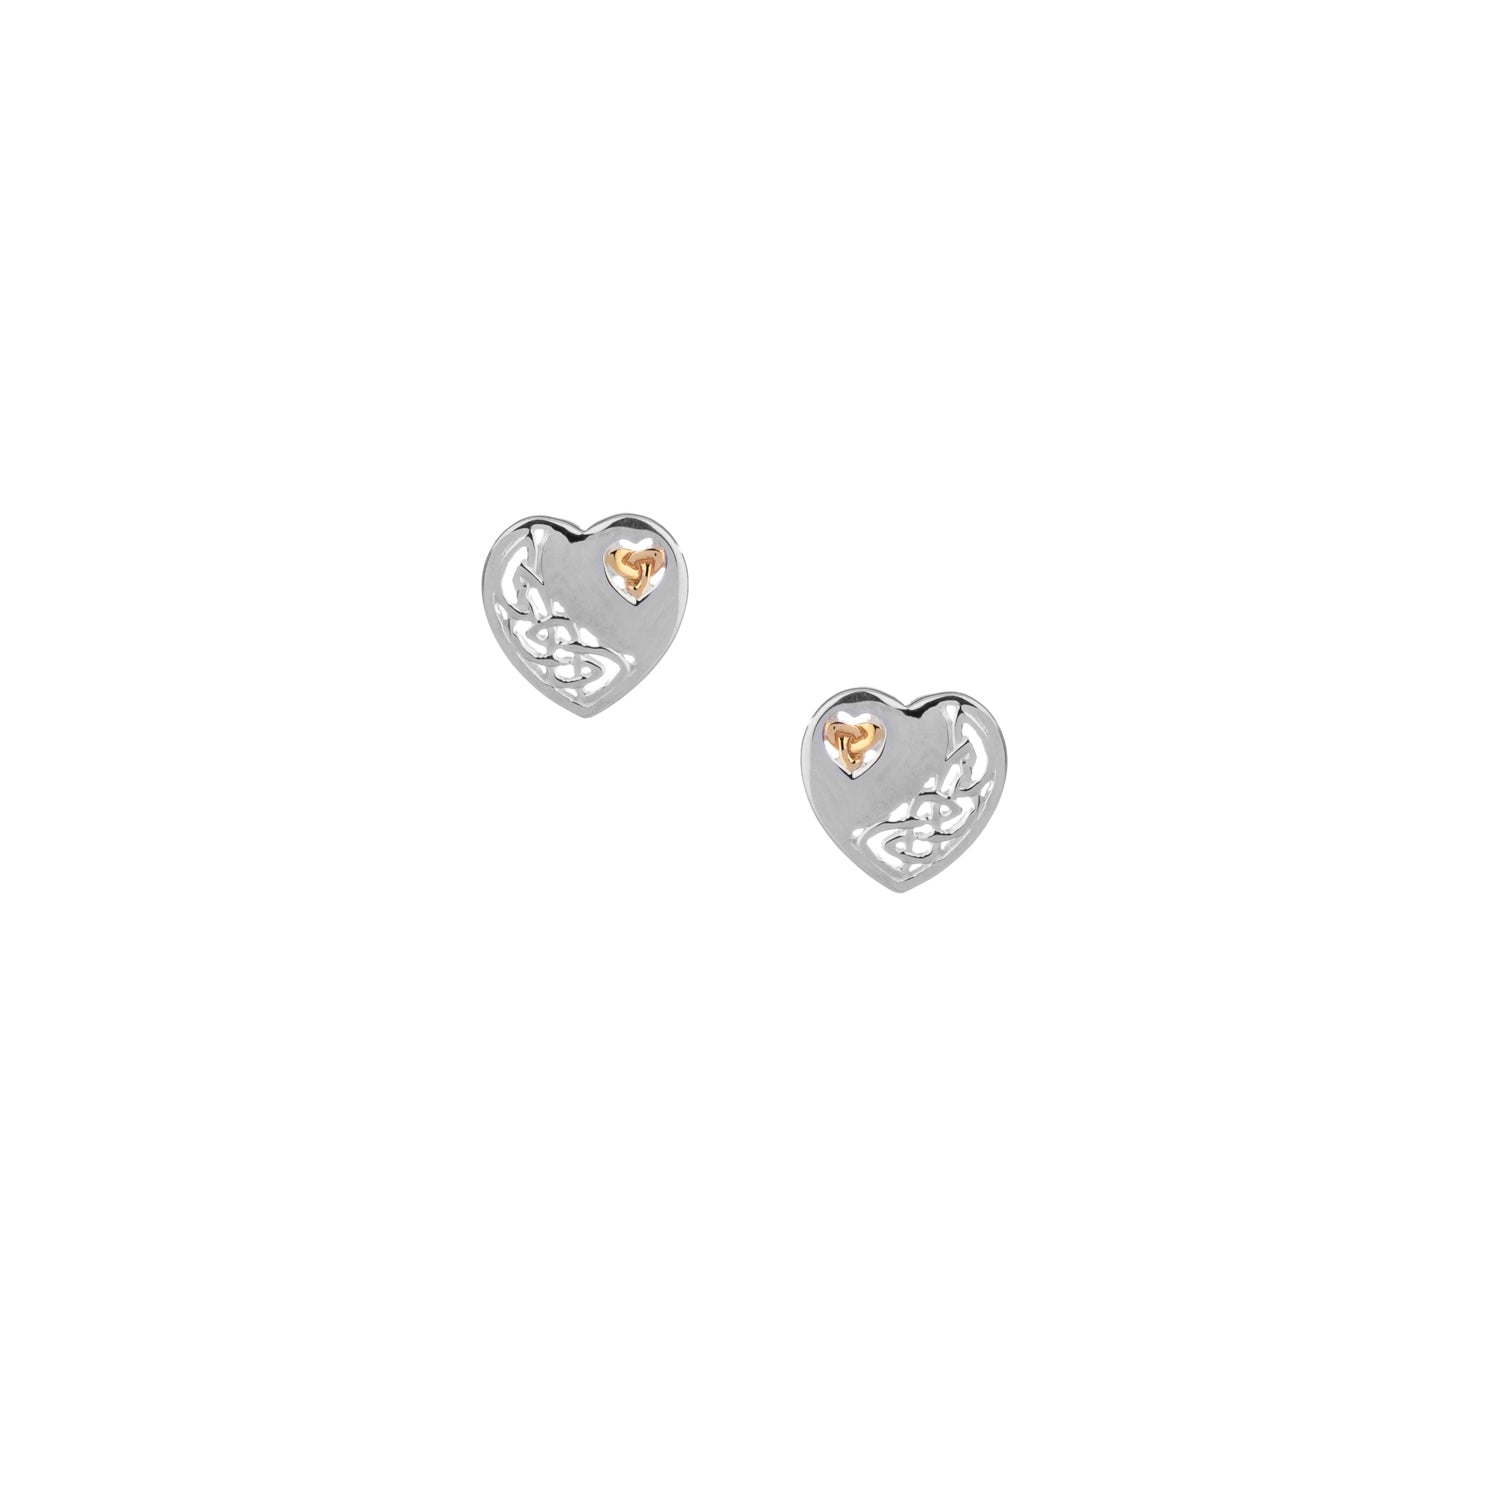 Earrings 10k Celtic Heart Post Earrings from welch and company jewelers near syracuse ny 